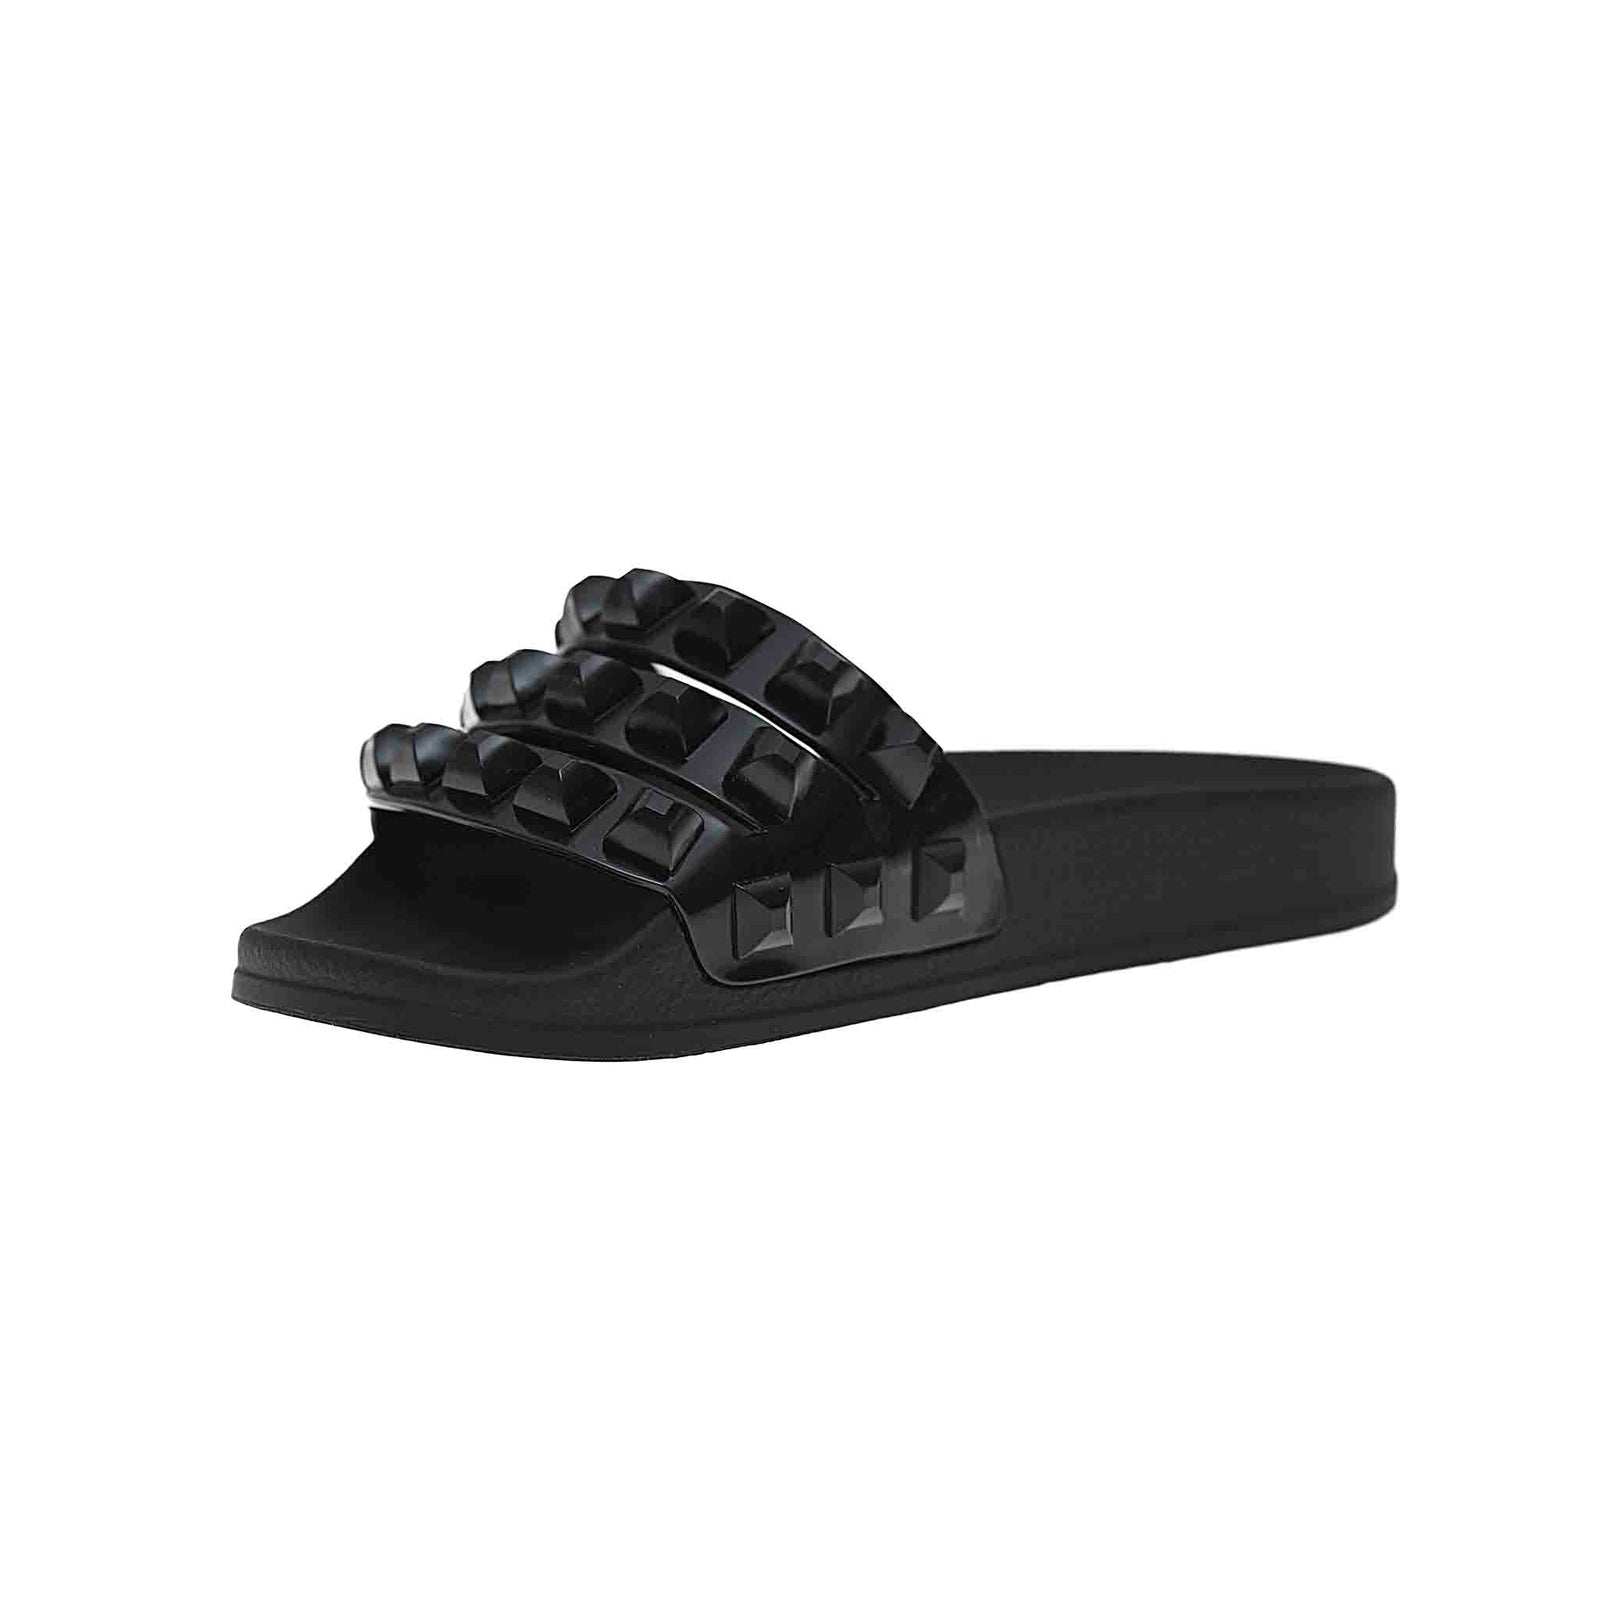 Black mini Carmen slides unique jelly kids sandals, attractive kids jelly shoes from Mini Carmen Sol made in Italy.